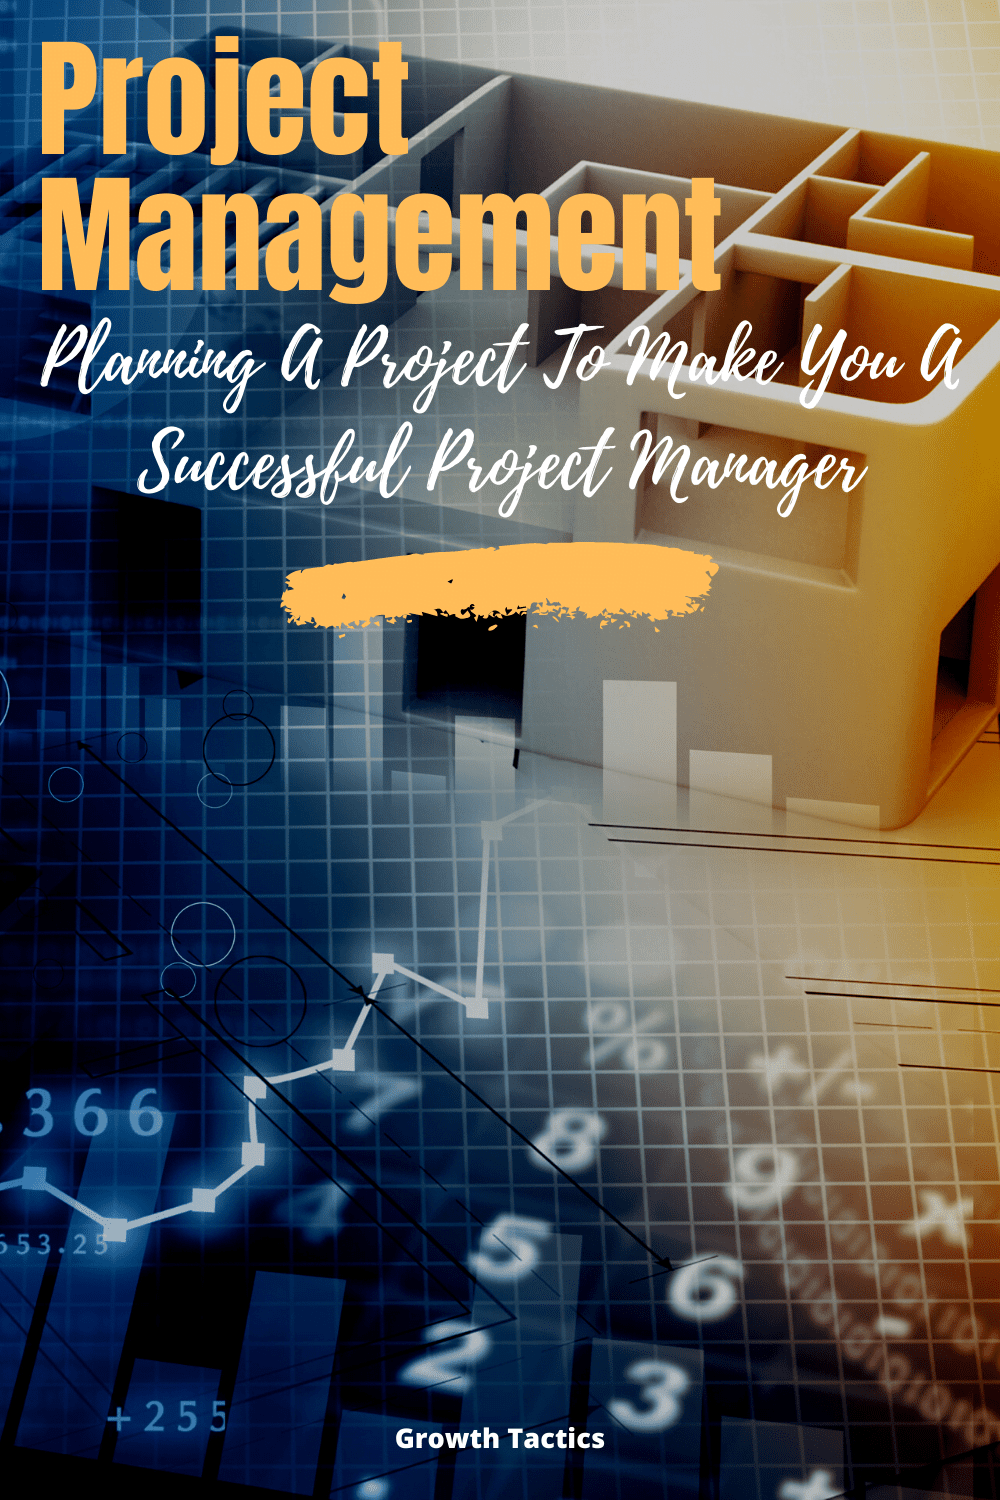 8 Tips For Successfully Planning A Project as a Manager